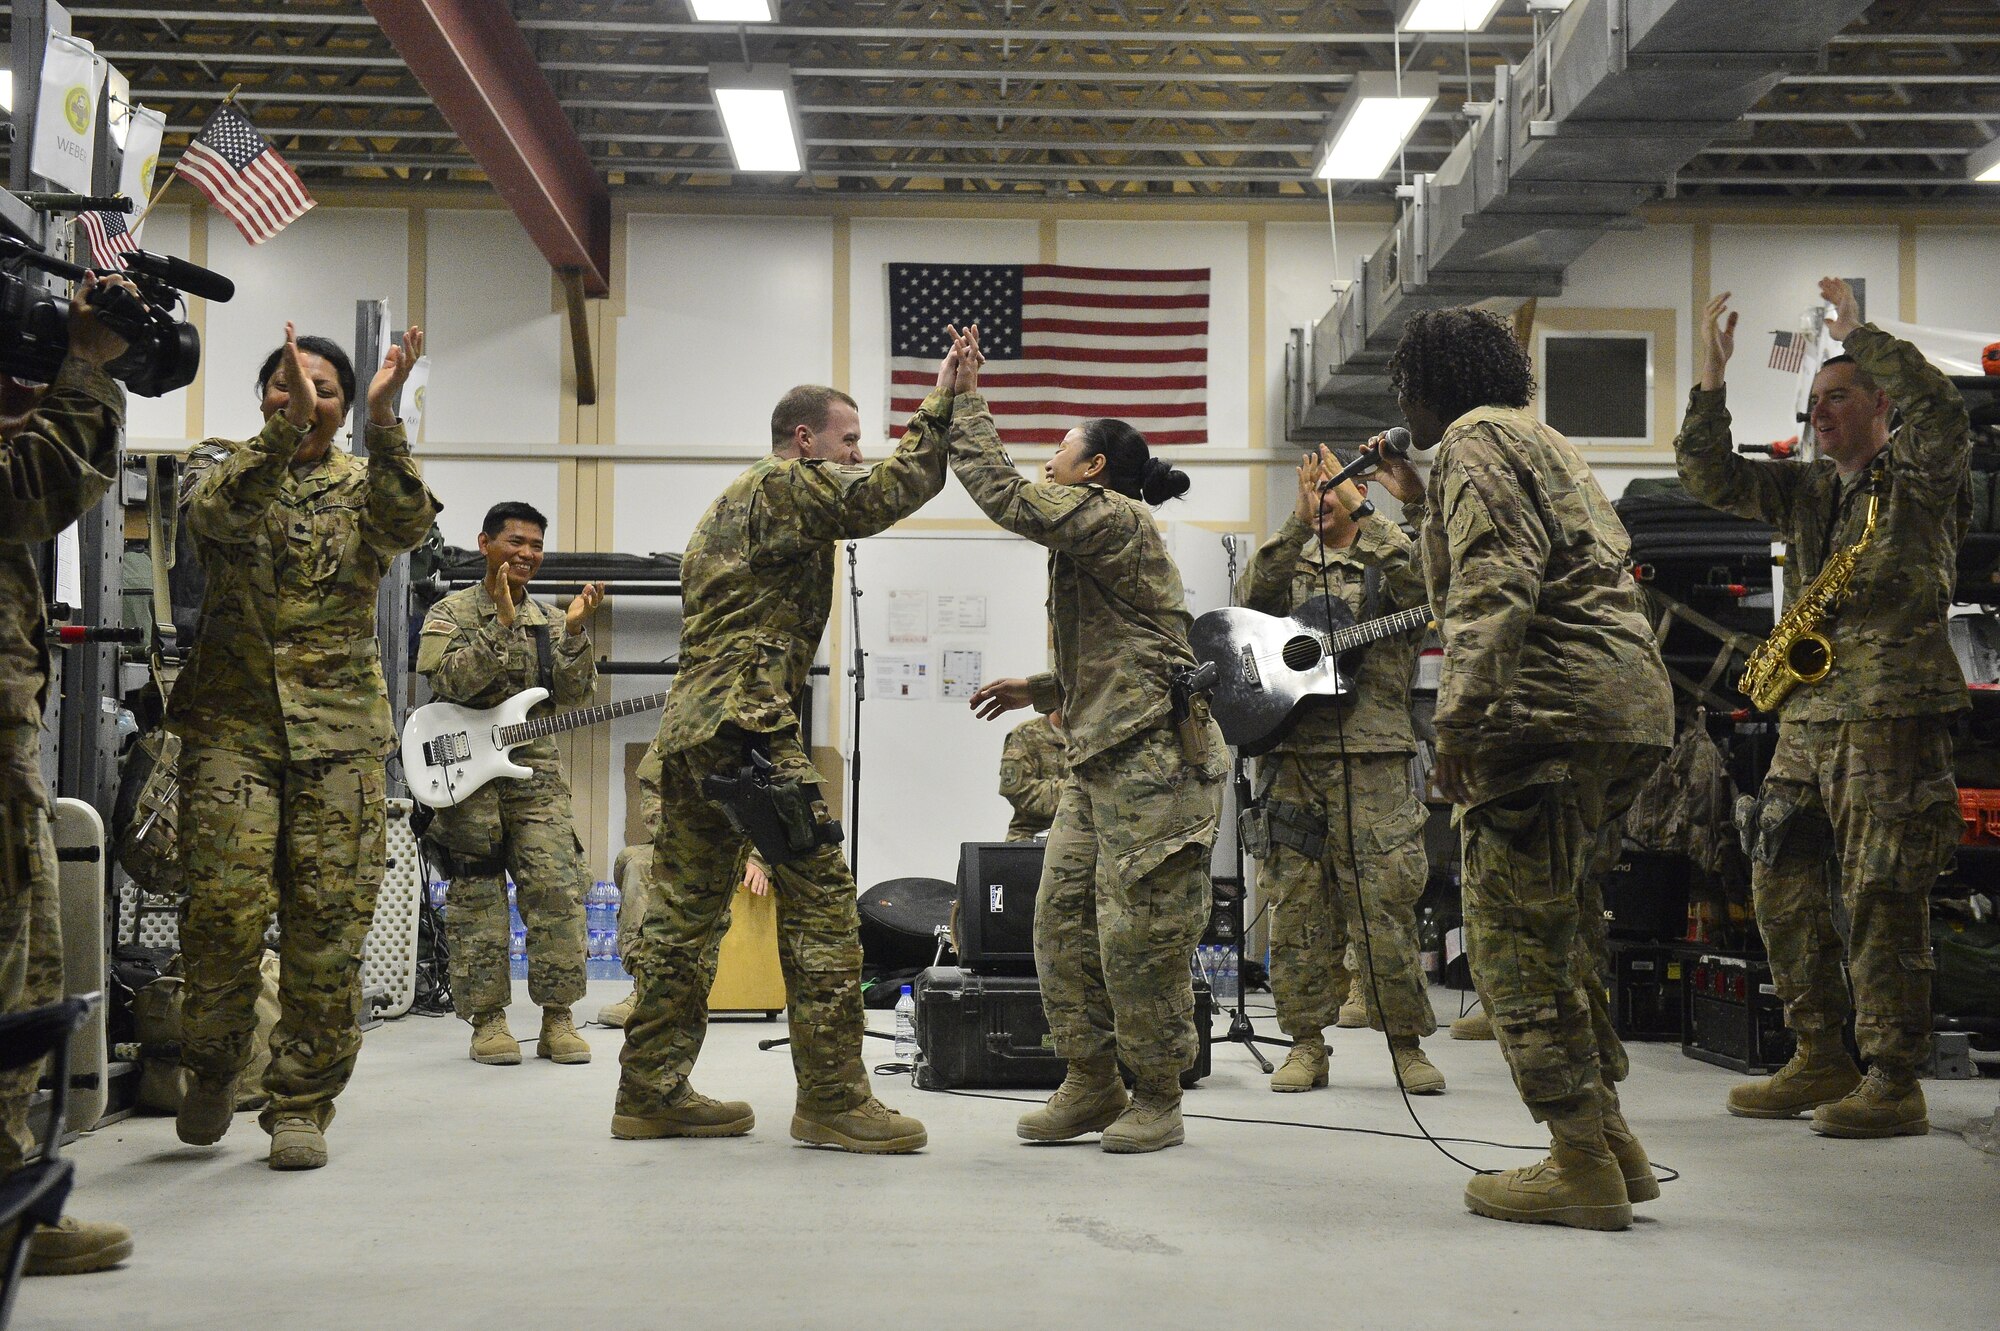 Members of the 455th Expeditionary Aeromedical Evacuation Squadron celebrate after dancing during a performance of the U.S. Air Forces Central Command Band April 11, 2014.  The band, Hypersonic, has a mission to entertain and uplift coalition forces throughout the region (U.S. Air Force photo/Staff Sgt. Vernon Young)